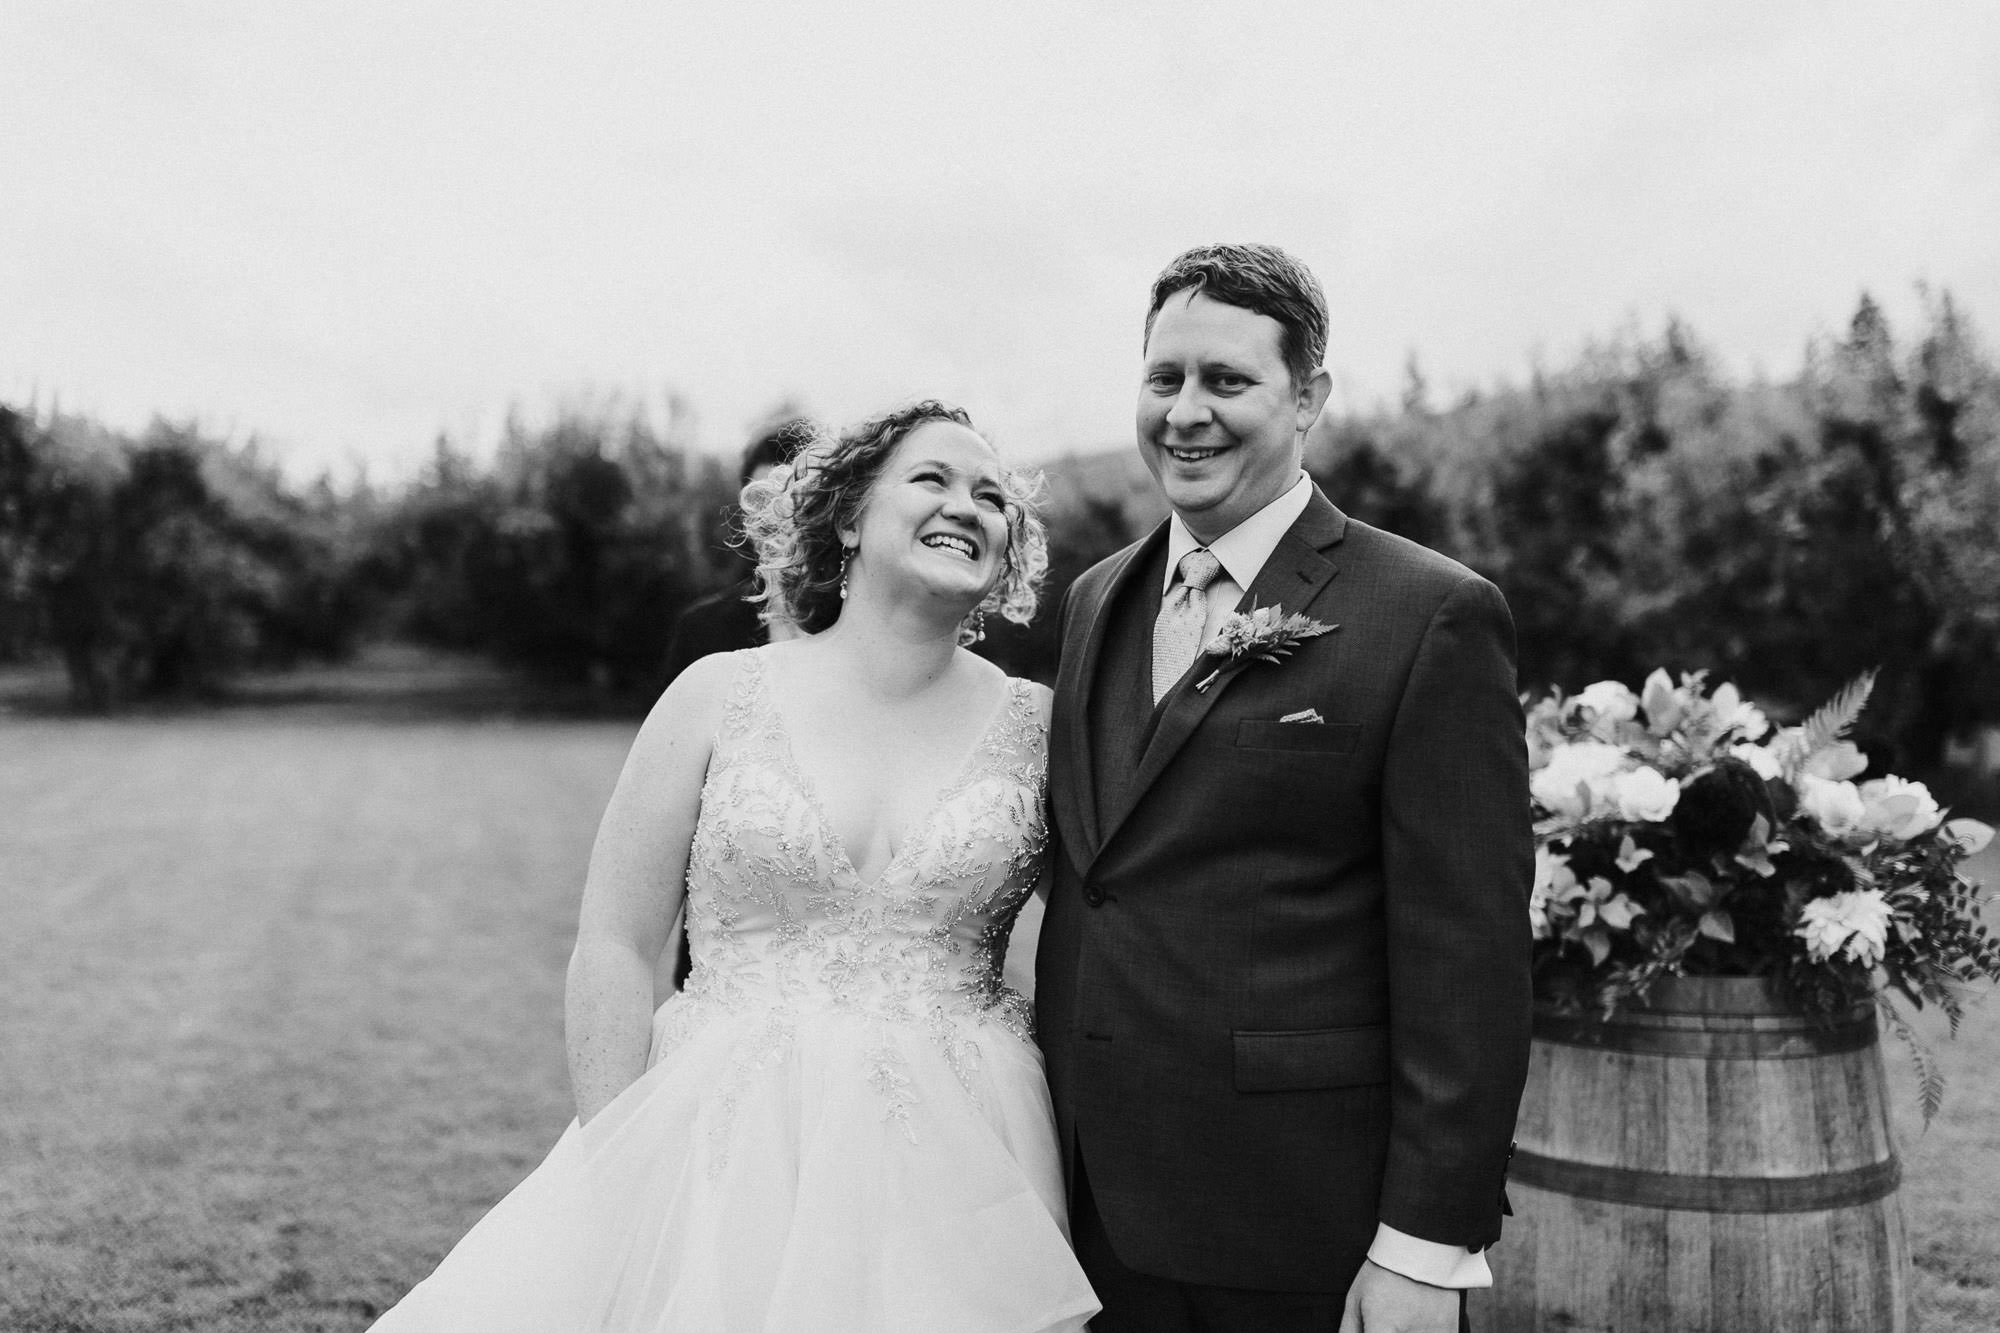 The bride and groom laugh during their wedding ceremony at Mt. View Orchards.